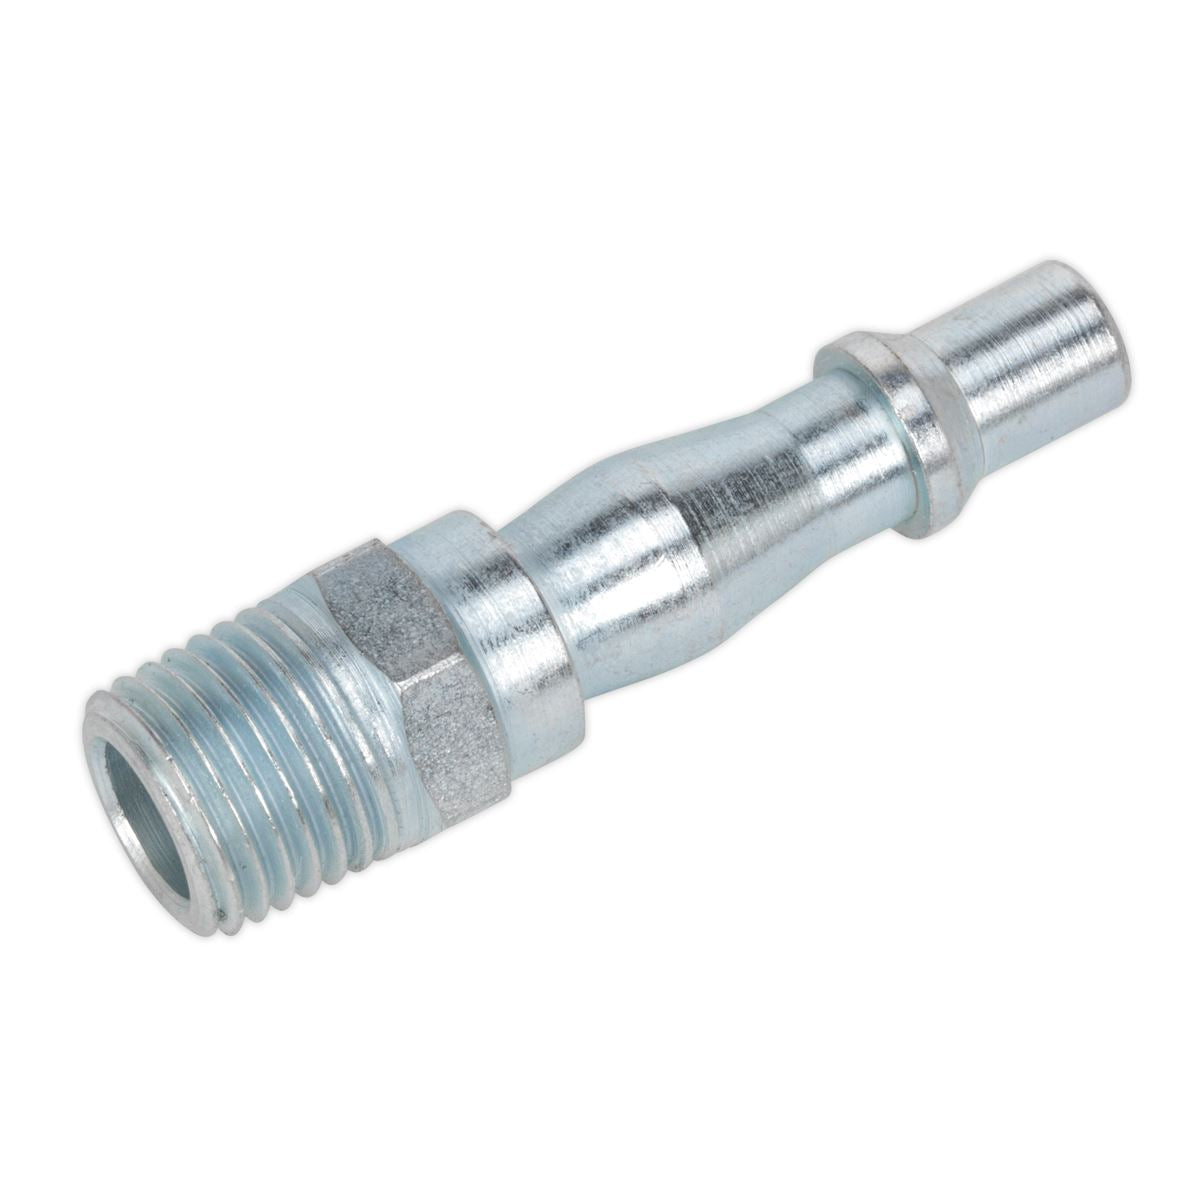 PCL Screwed Adaptor Male 1/4"BSPT Pack of 100